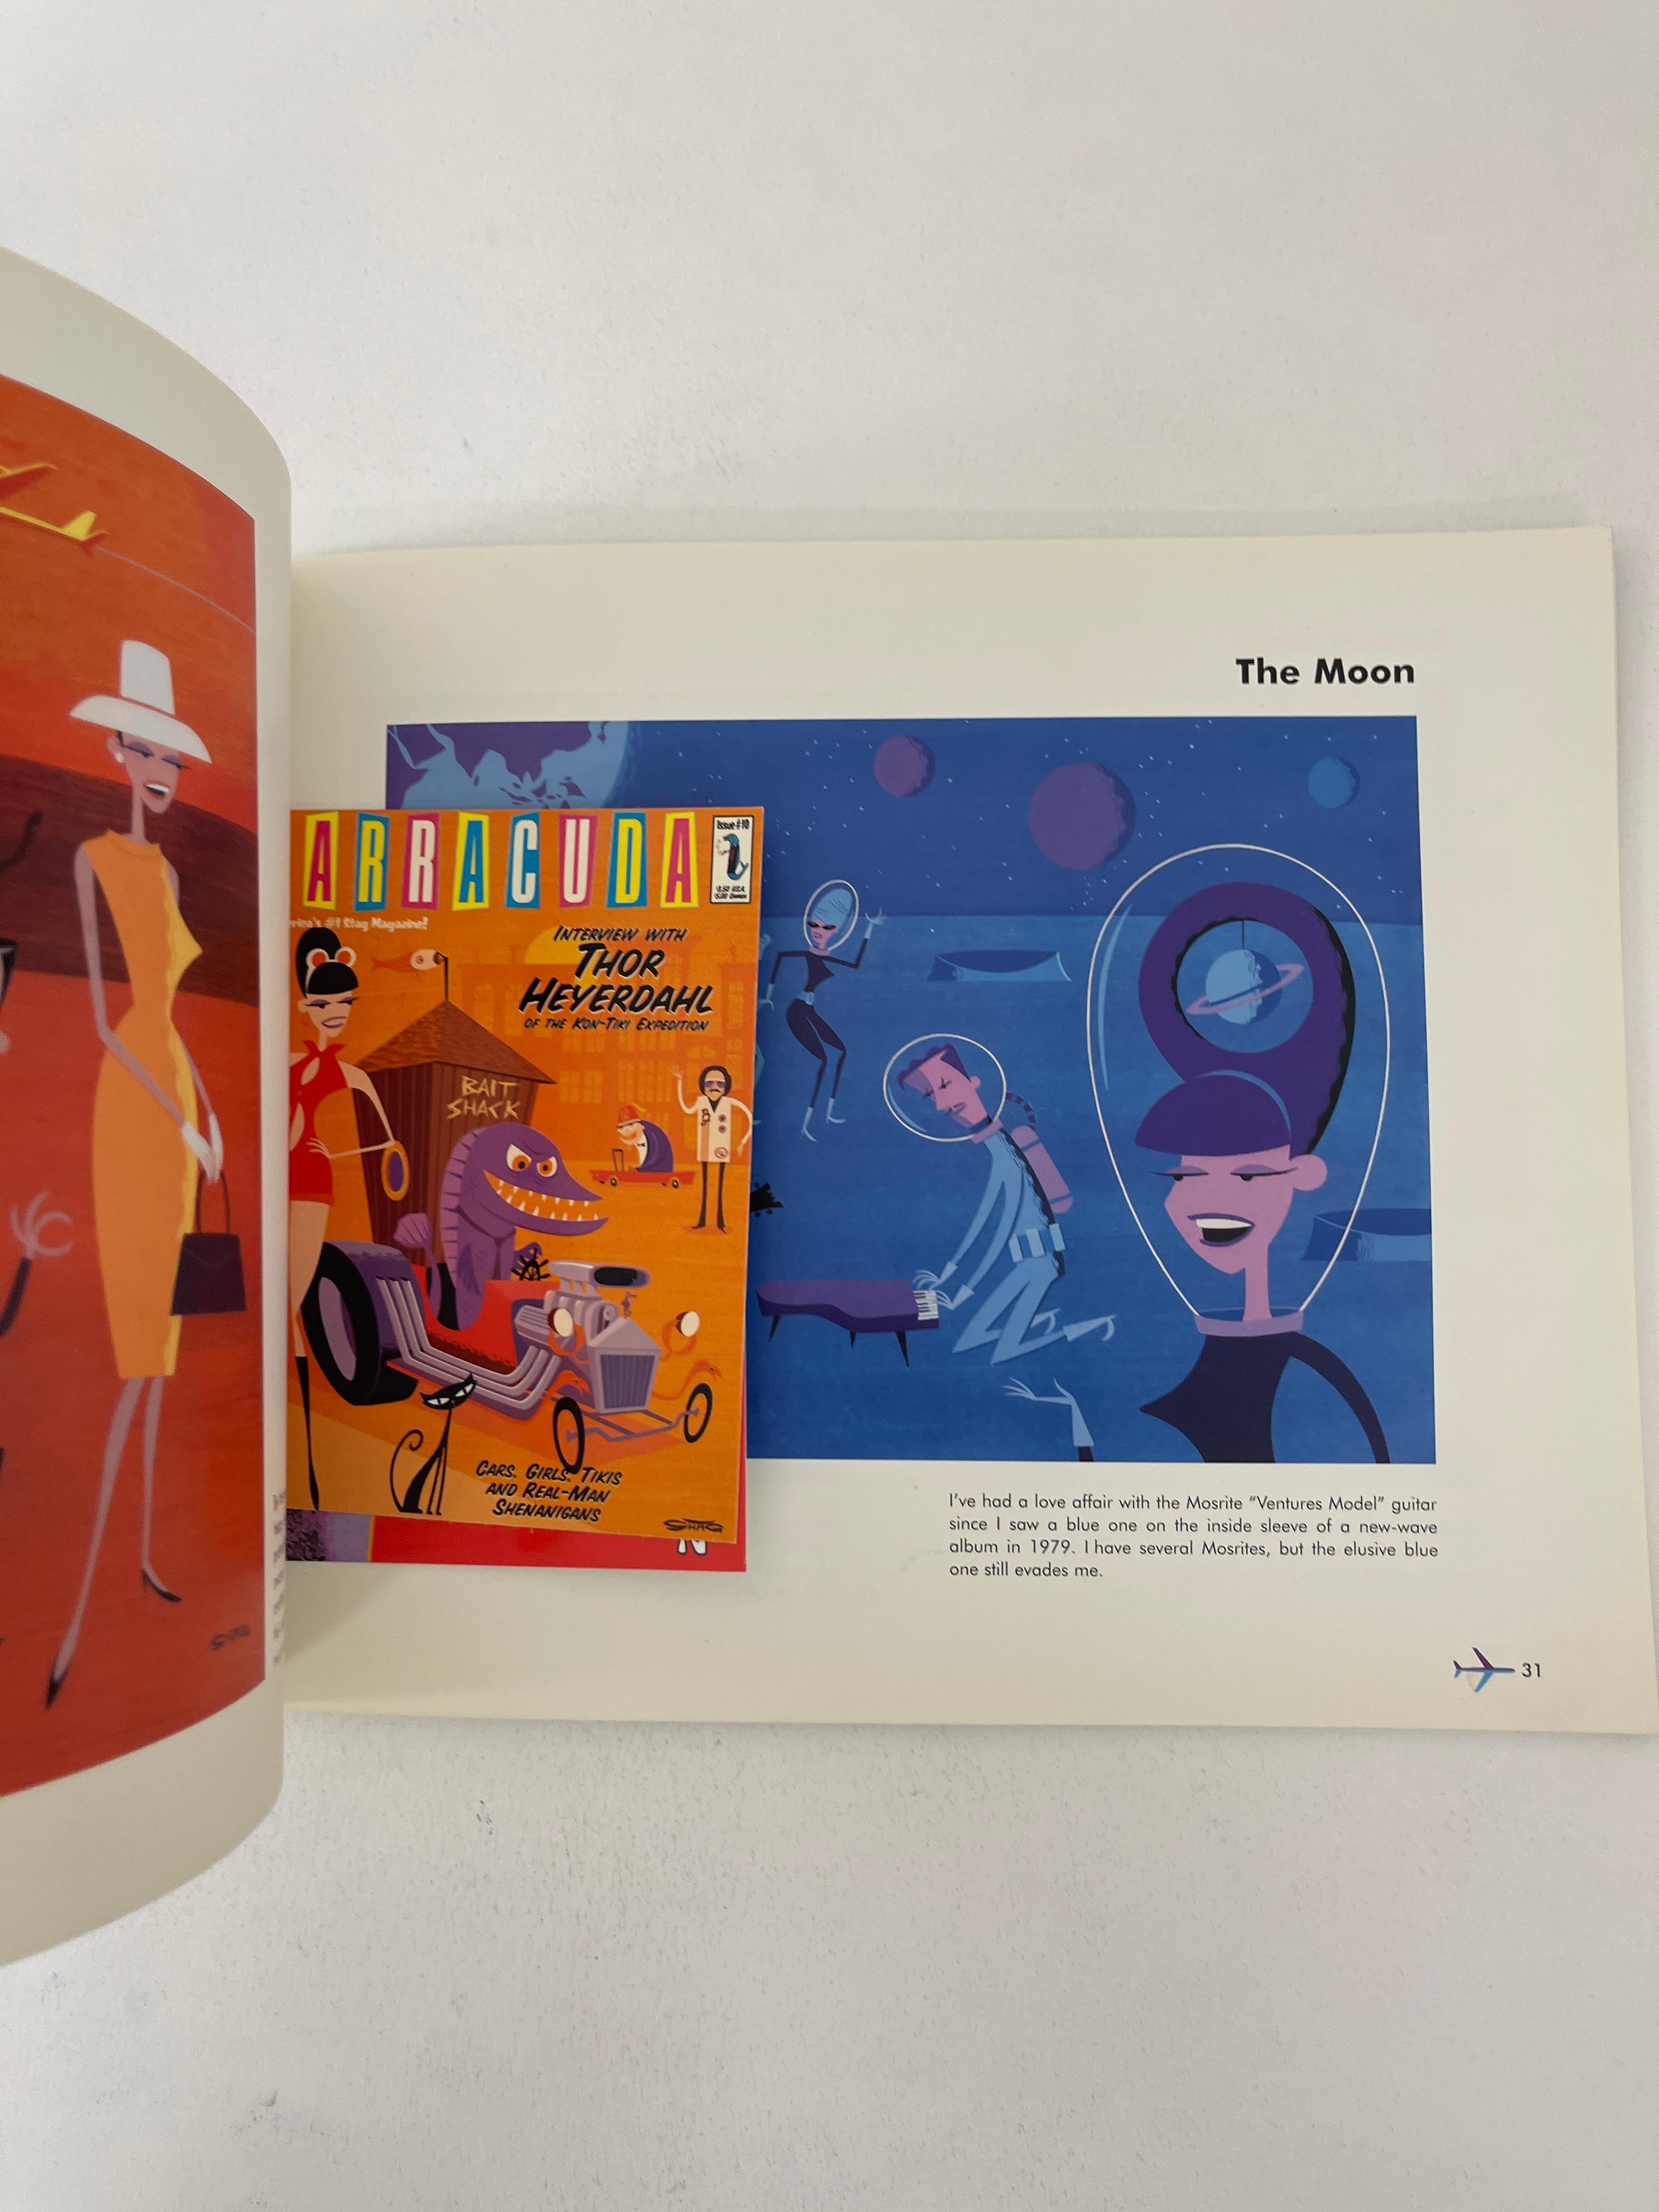 Supersonic Swingers: New Works by Shag SIGNED BY AUTHOR